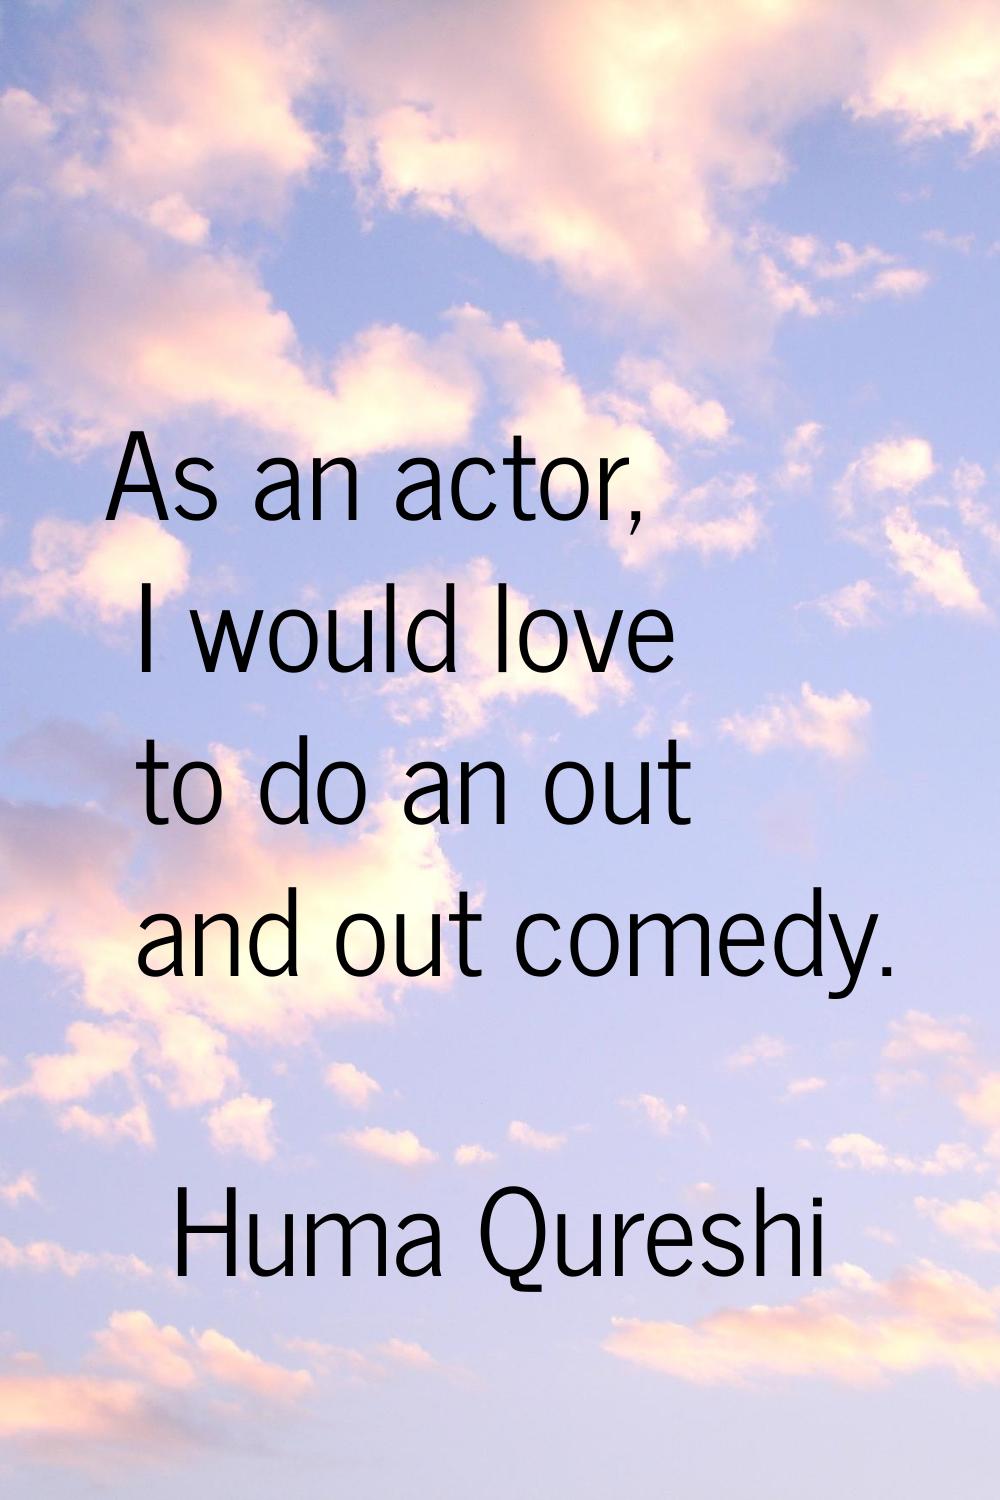 As an actor, I would love to do an out and out comedy.